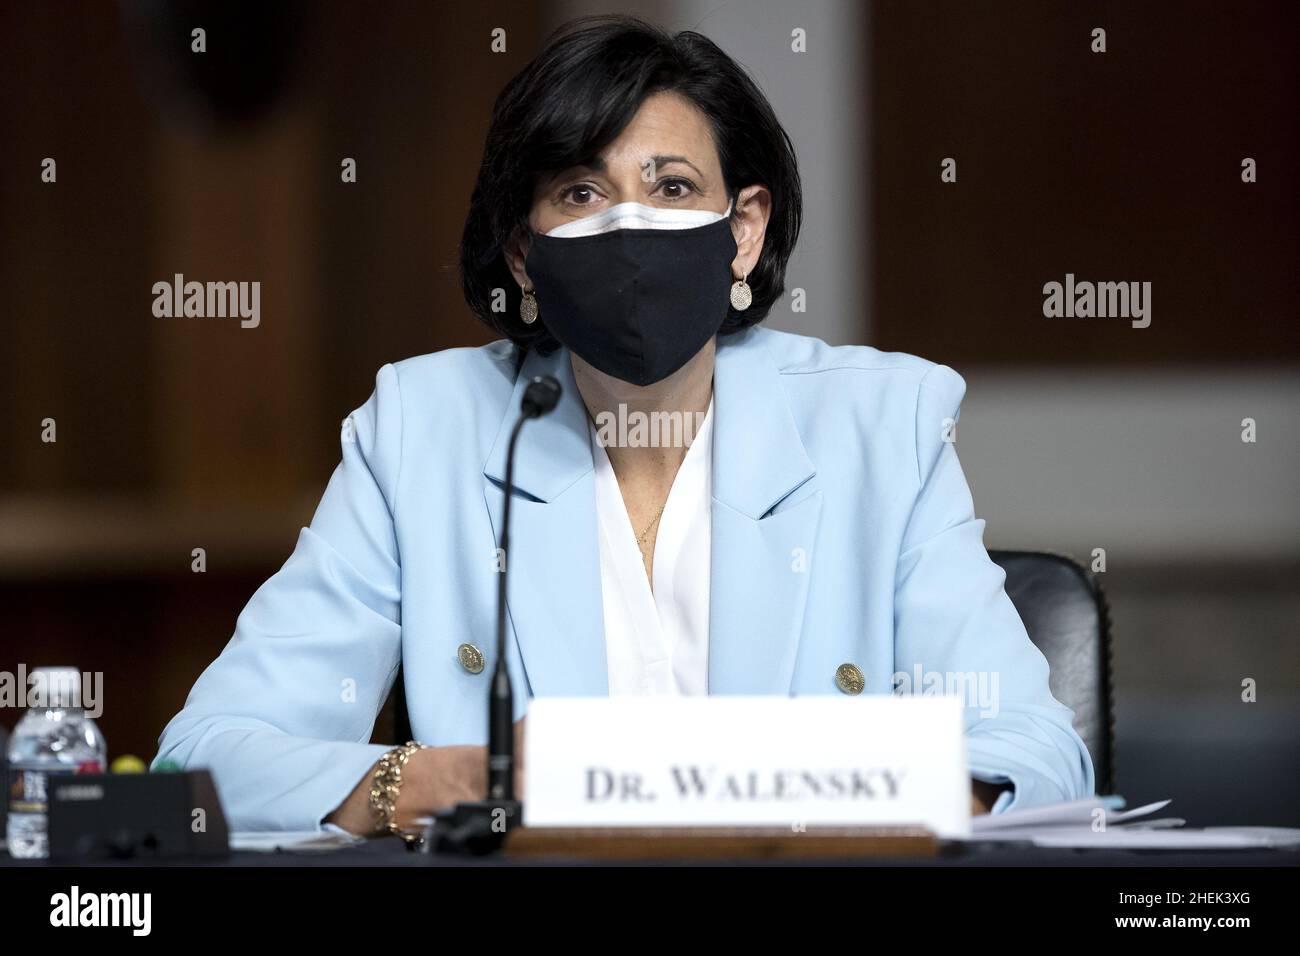 Washington, United States. 11th Jan, 2022. Dr. Rochelle Walensky, Director of the Centers for Disease Control and Prevention, testifies before a Senate Health, Education, Labor, and Pensions Committee hearing to examine the federal response to COVID-19 and new emerging variants on Capitol Hill in Washington, DC on Tuesday, January 11, 2022. Pool photo by Greg Nash/UPI Credit: UPI/Alamy Live News Stock Photo